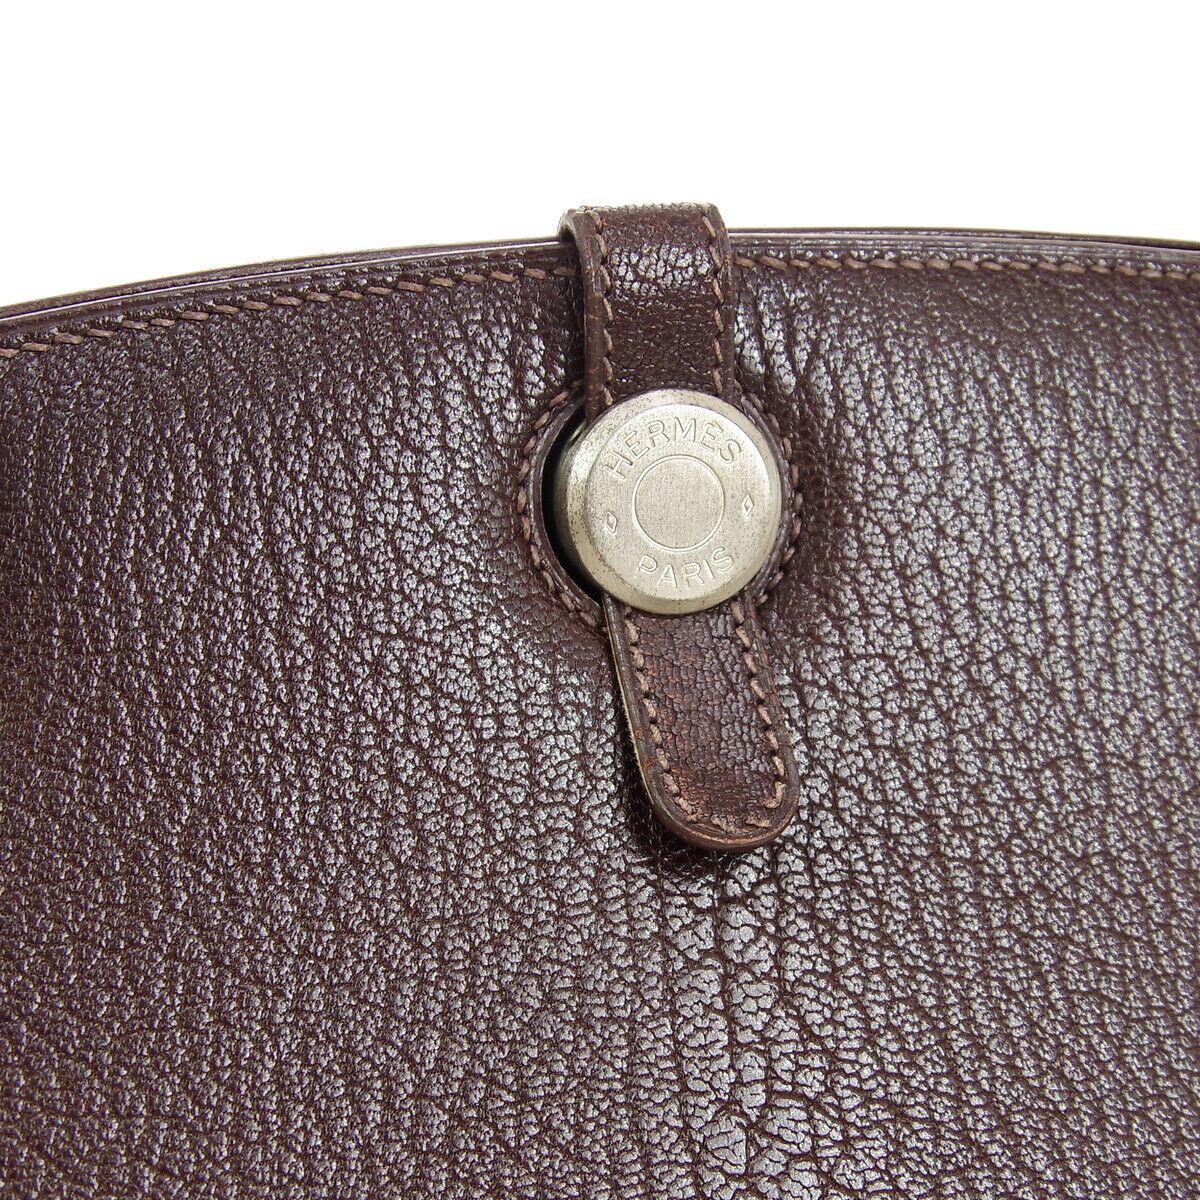 Leather
Palladium tone hardware
Leather lining
Date code present
Made in France
Handle drop 3.5